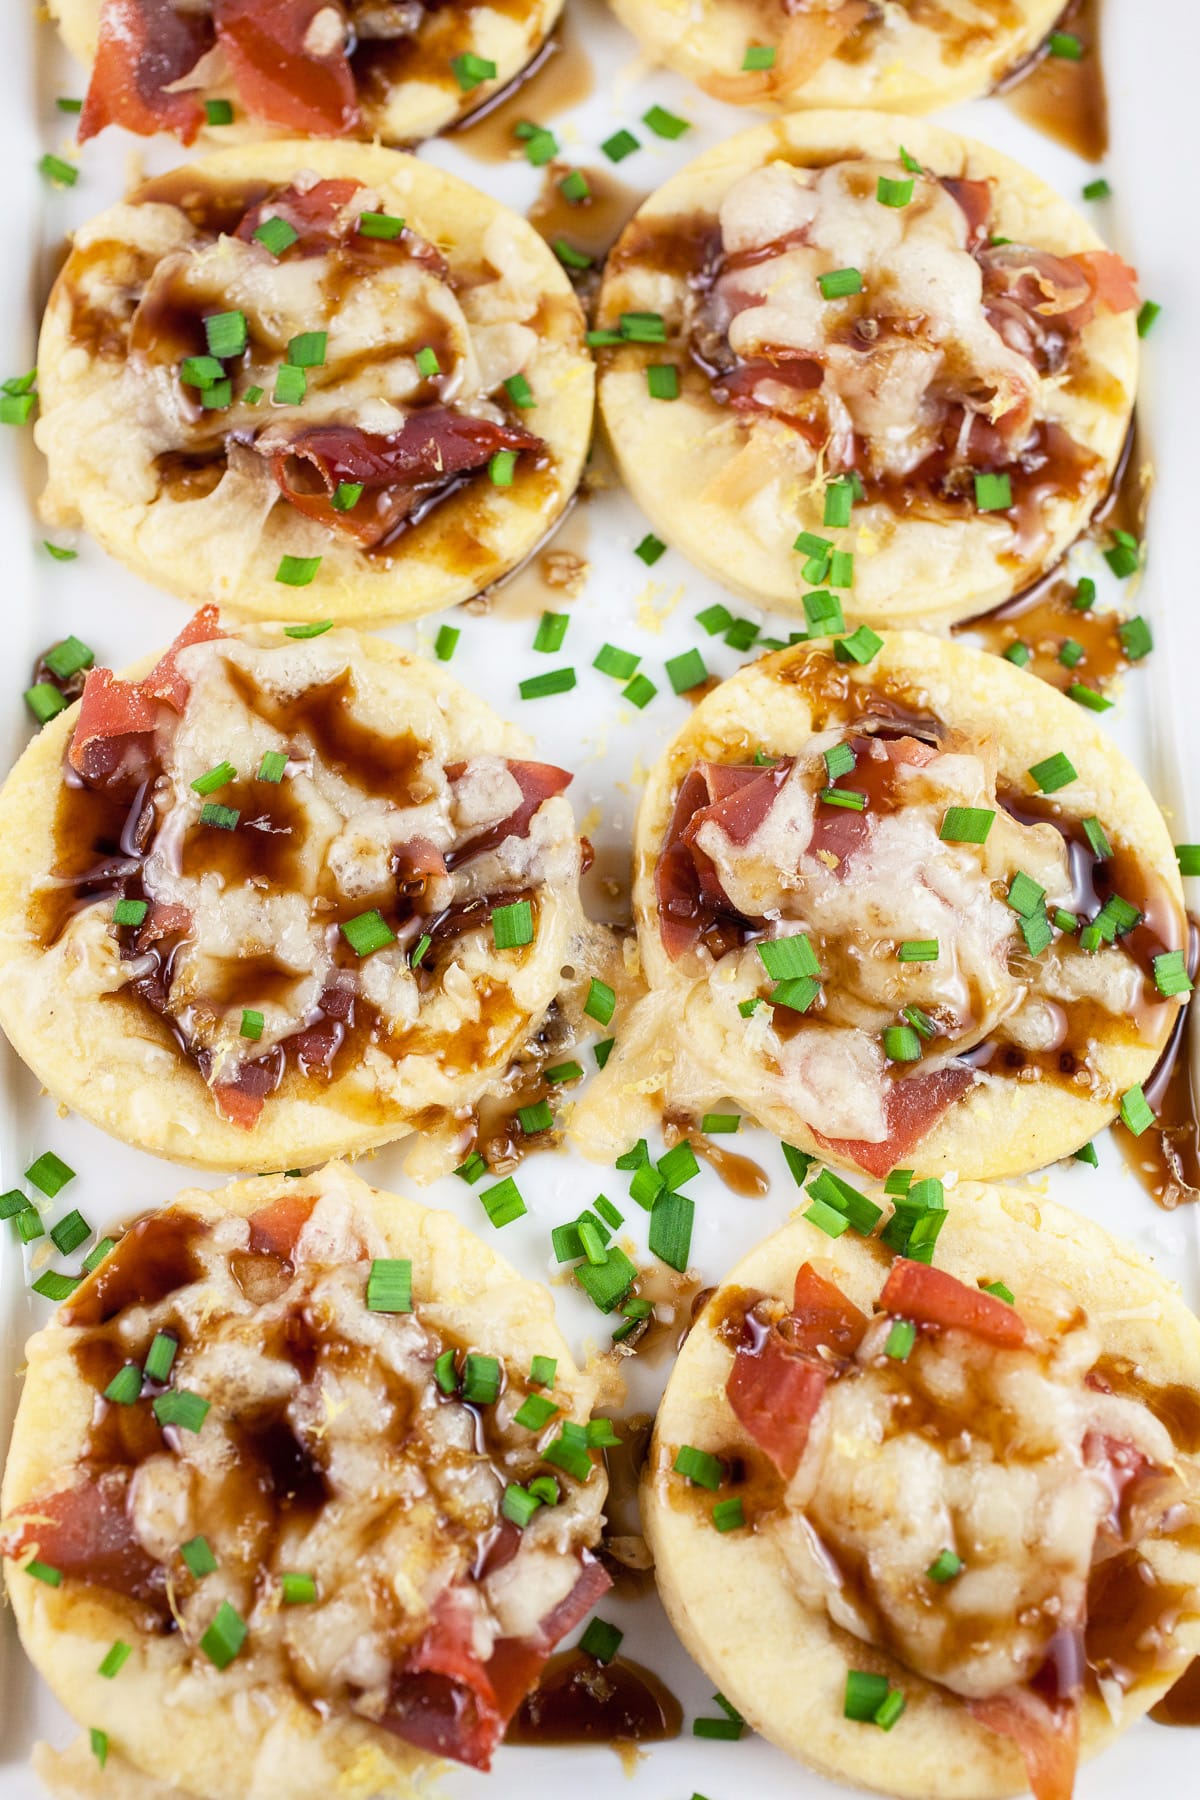 Gruyere prosciutto tartlets with balsamic glaze and minced chives on white platter.